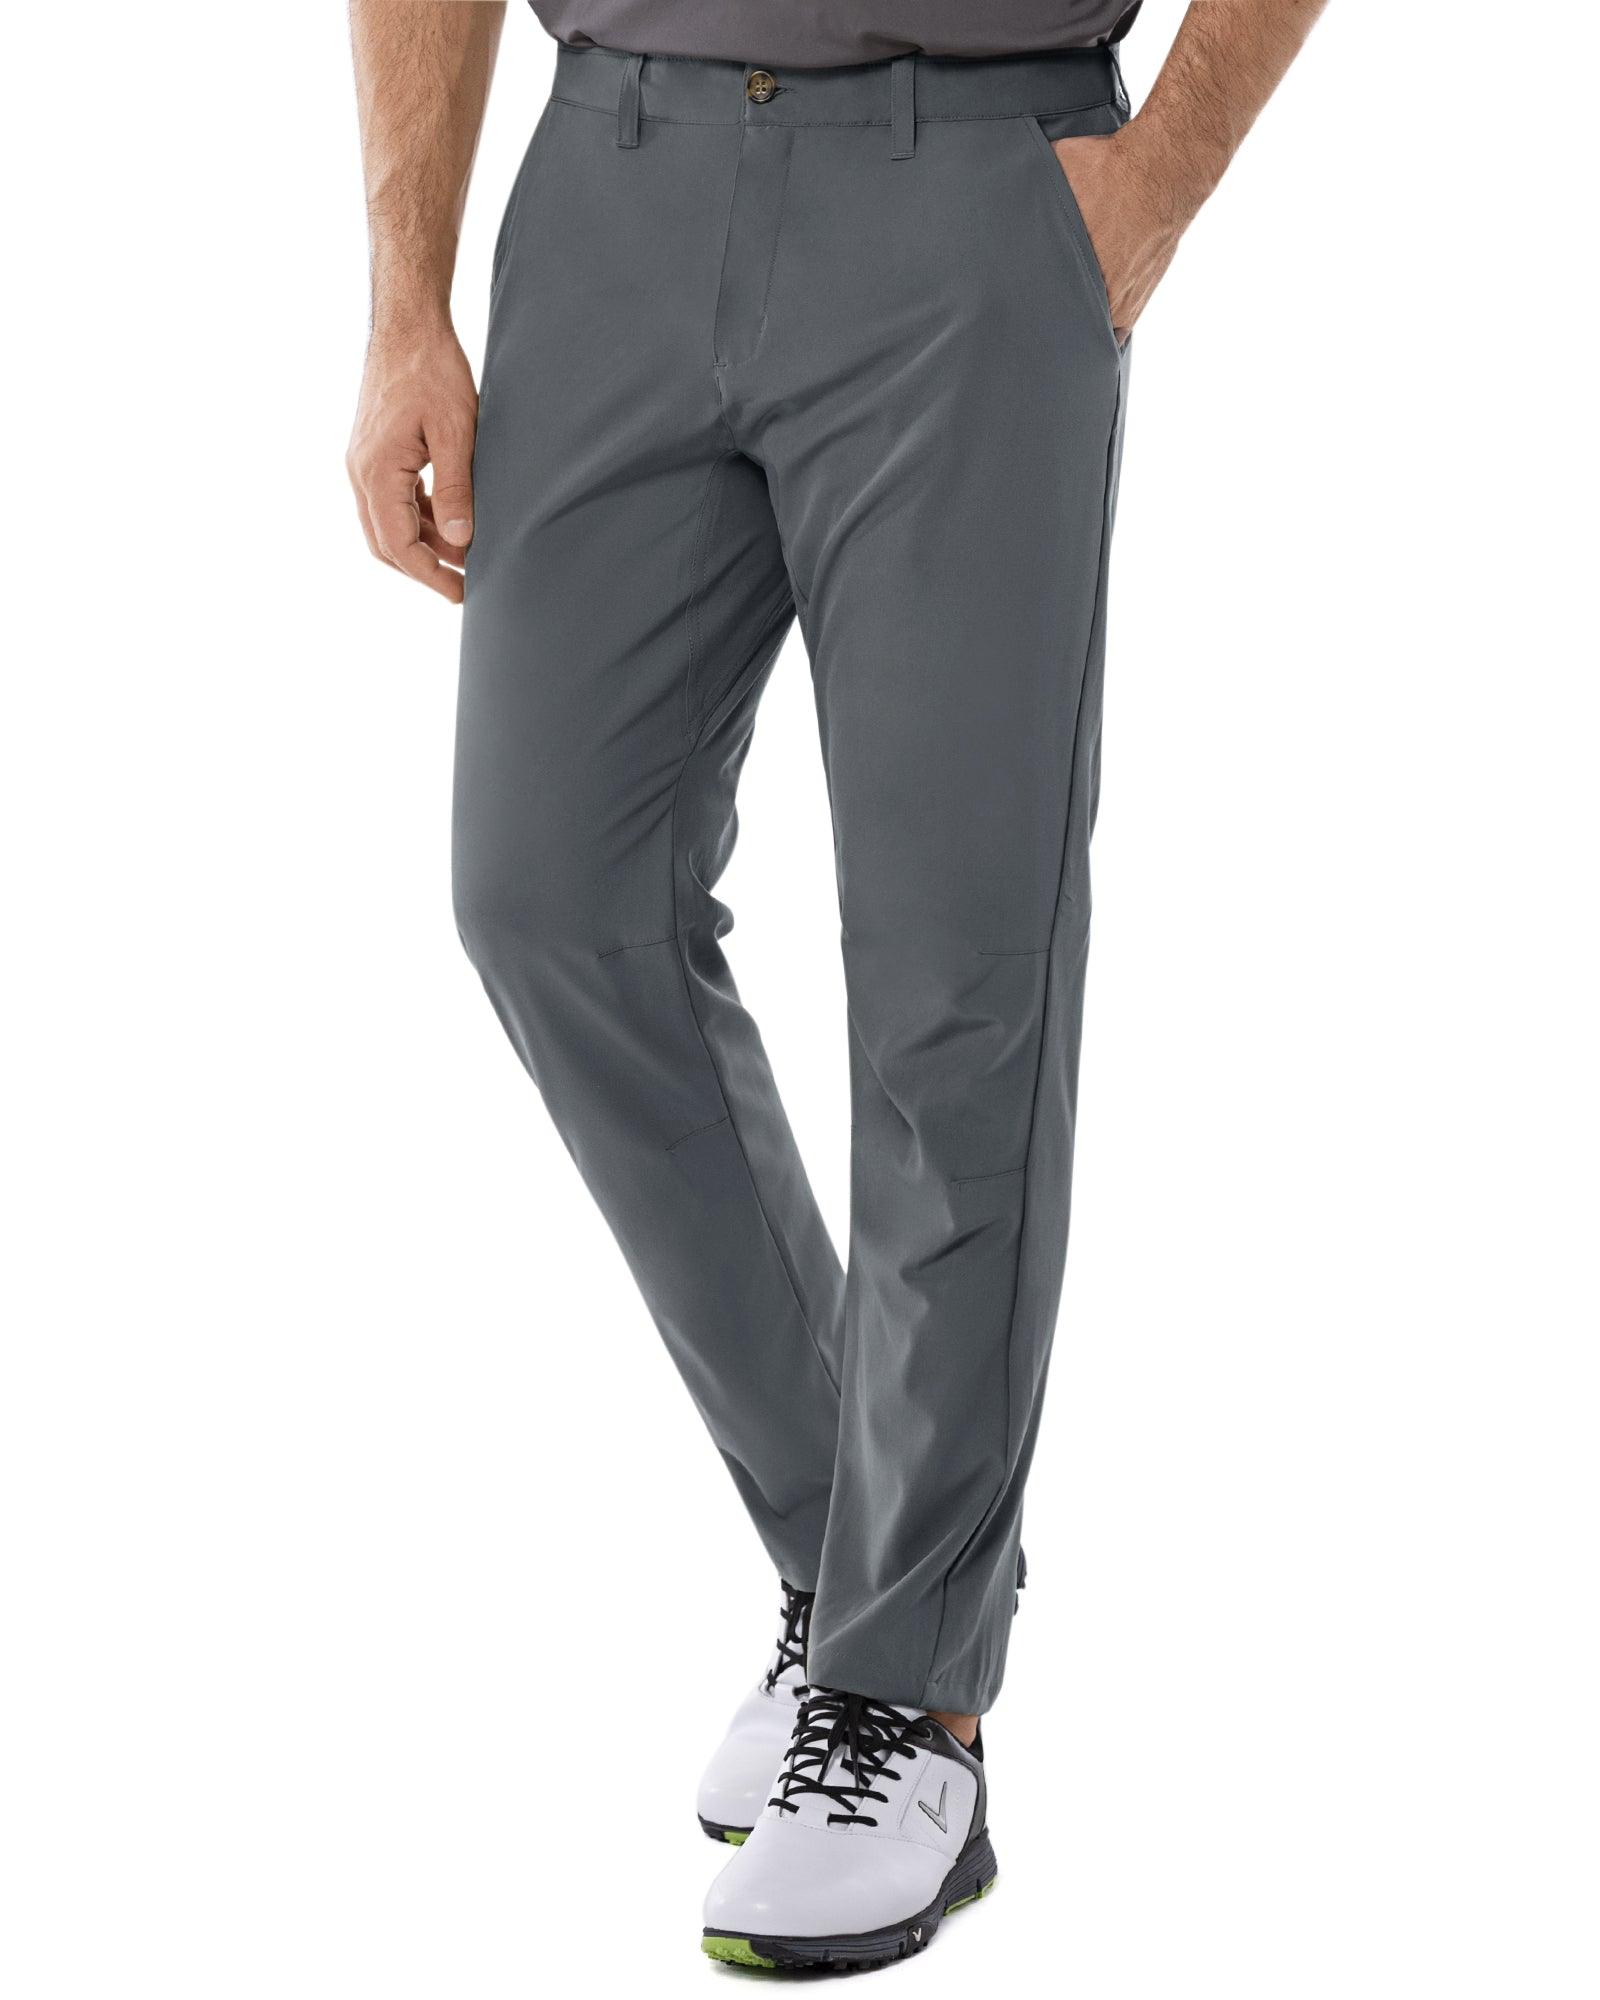 Buy Funky Golf Clothes and Accessories | Golf outfit, Golf pants, Clothing  company